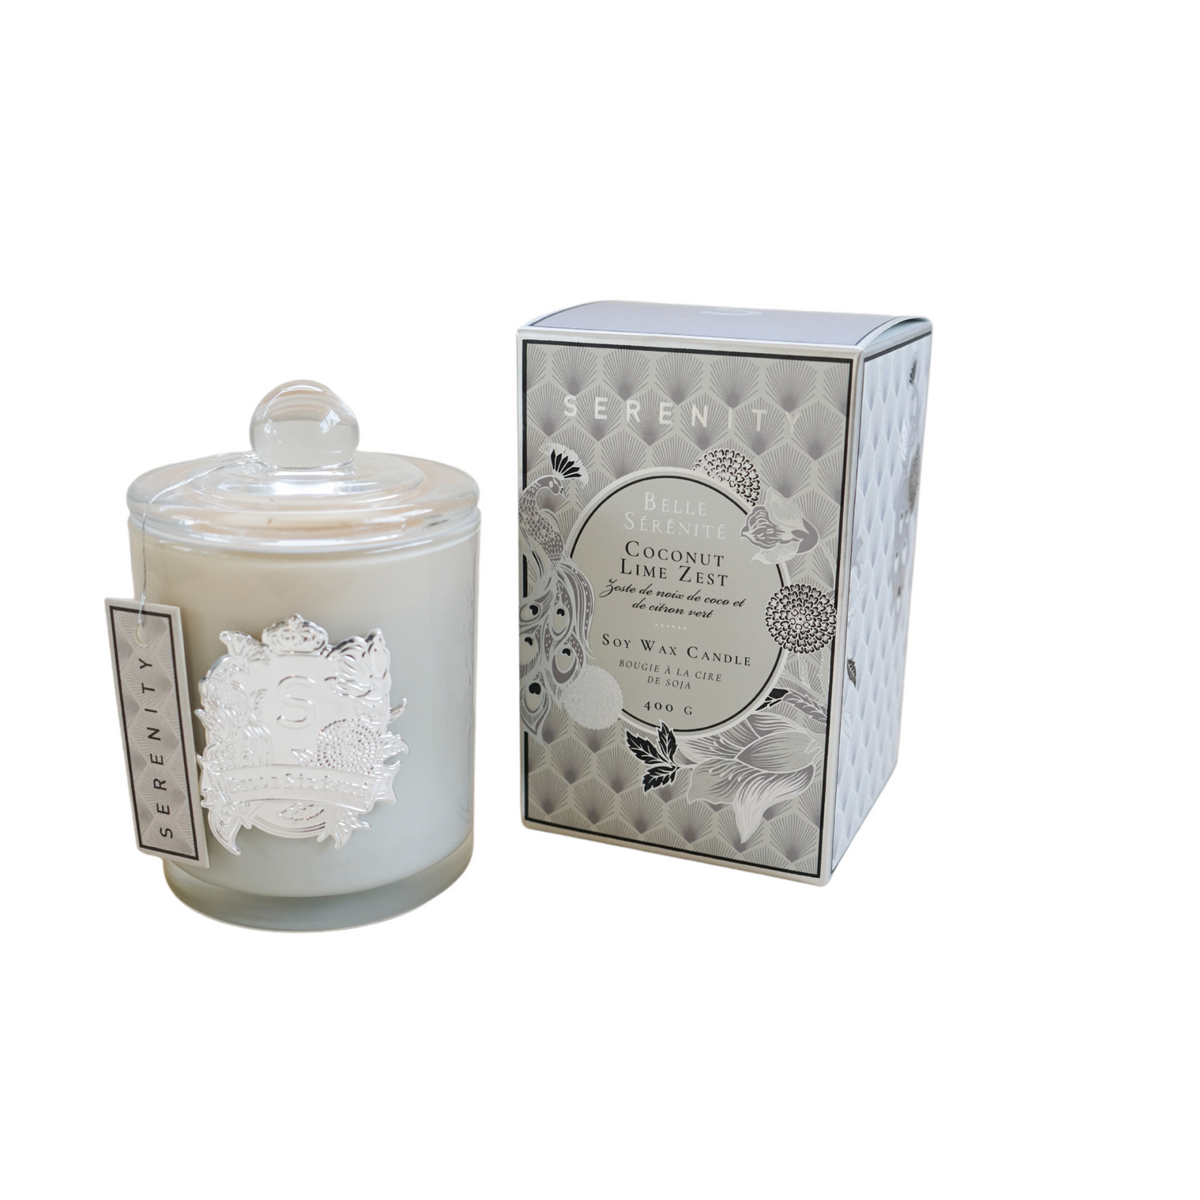 Coconut Lime Zest 400g Candle